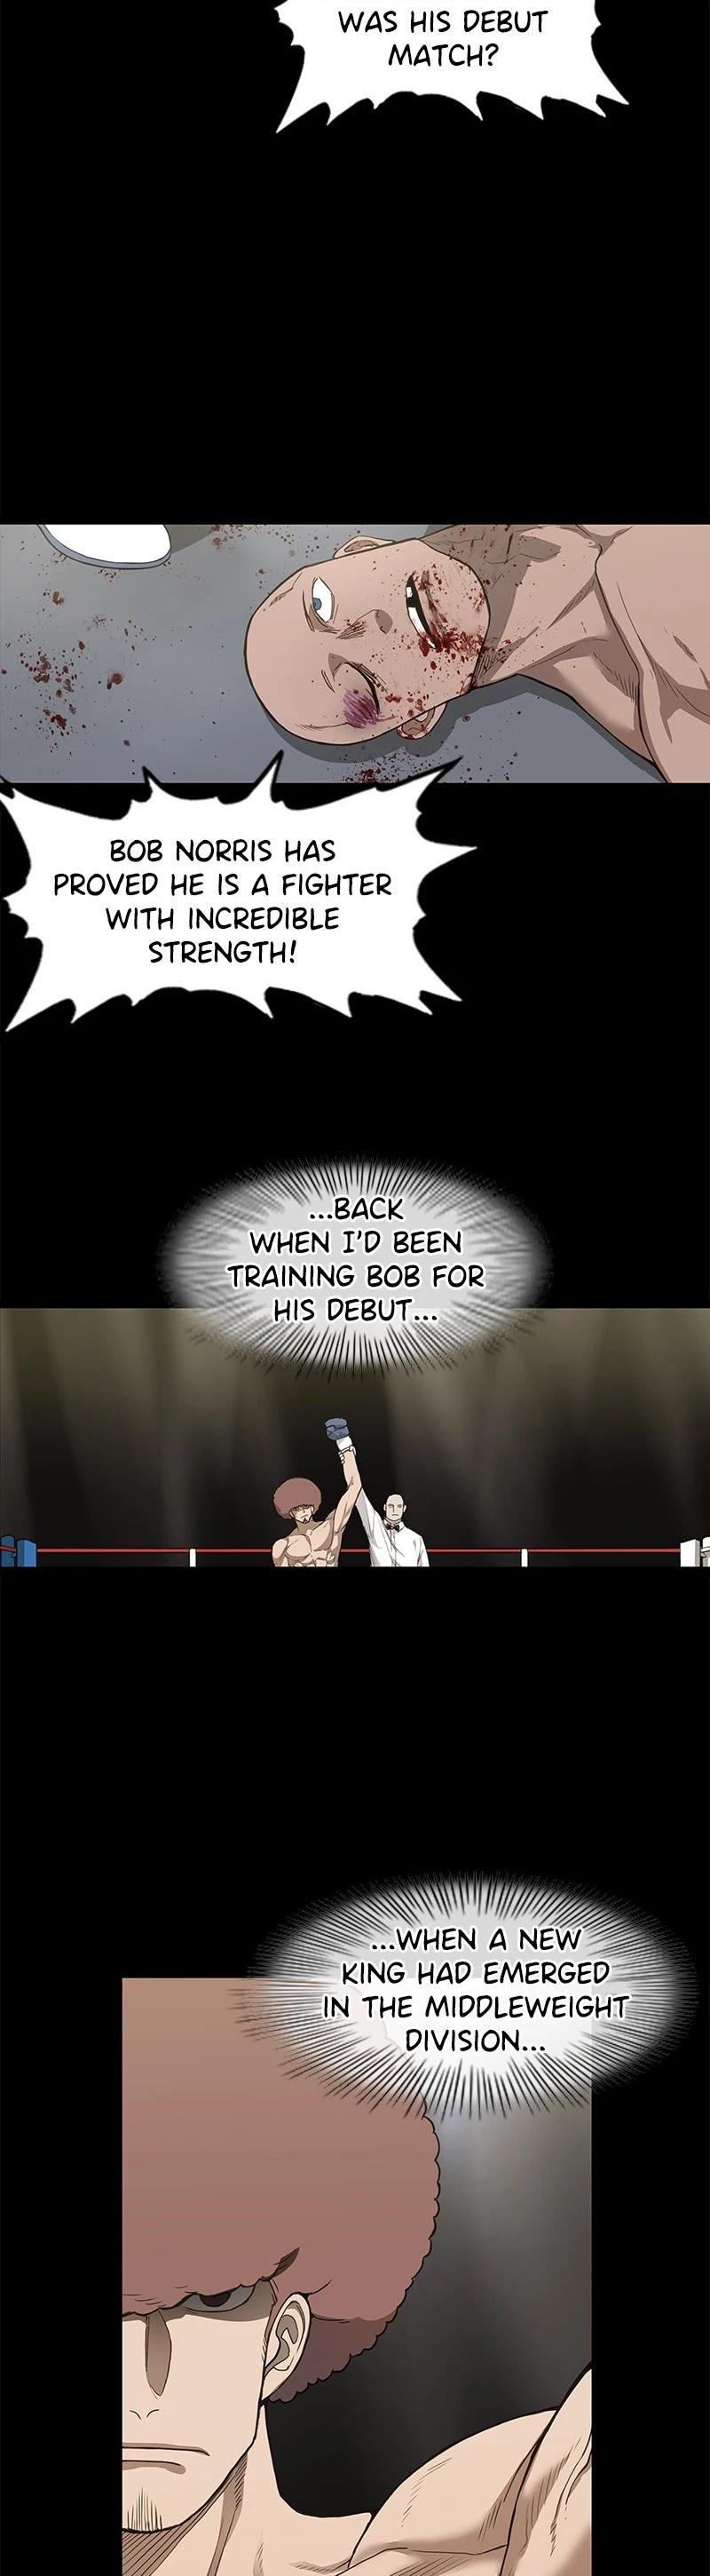 The Boxer Chapter 110: Ep. 100 - Light (1) page 27 - 